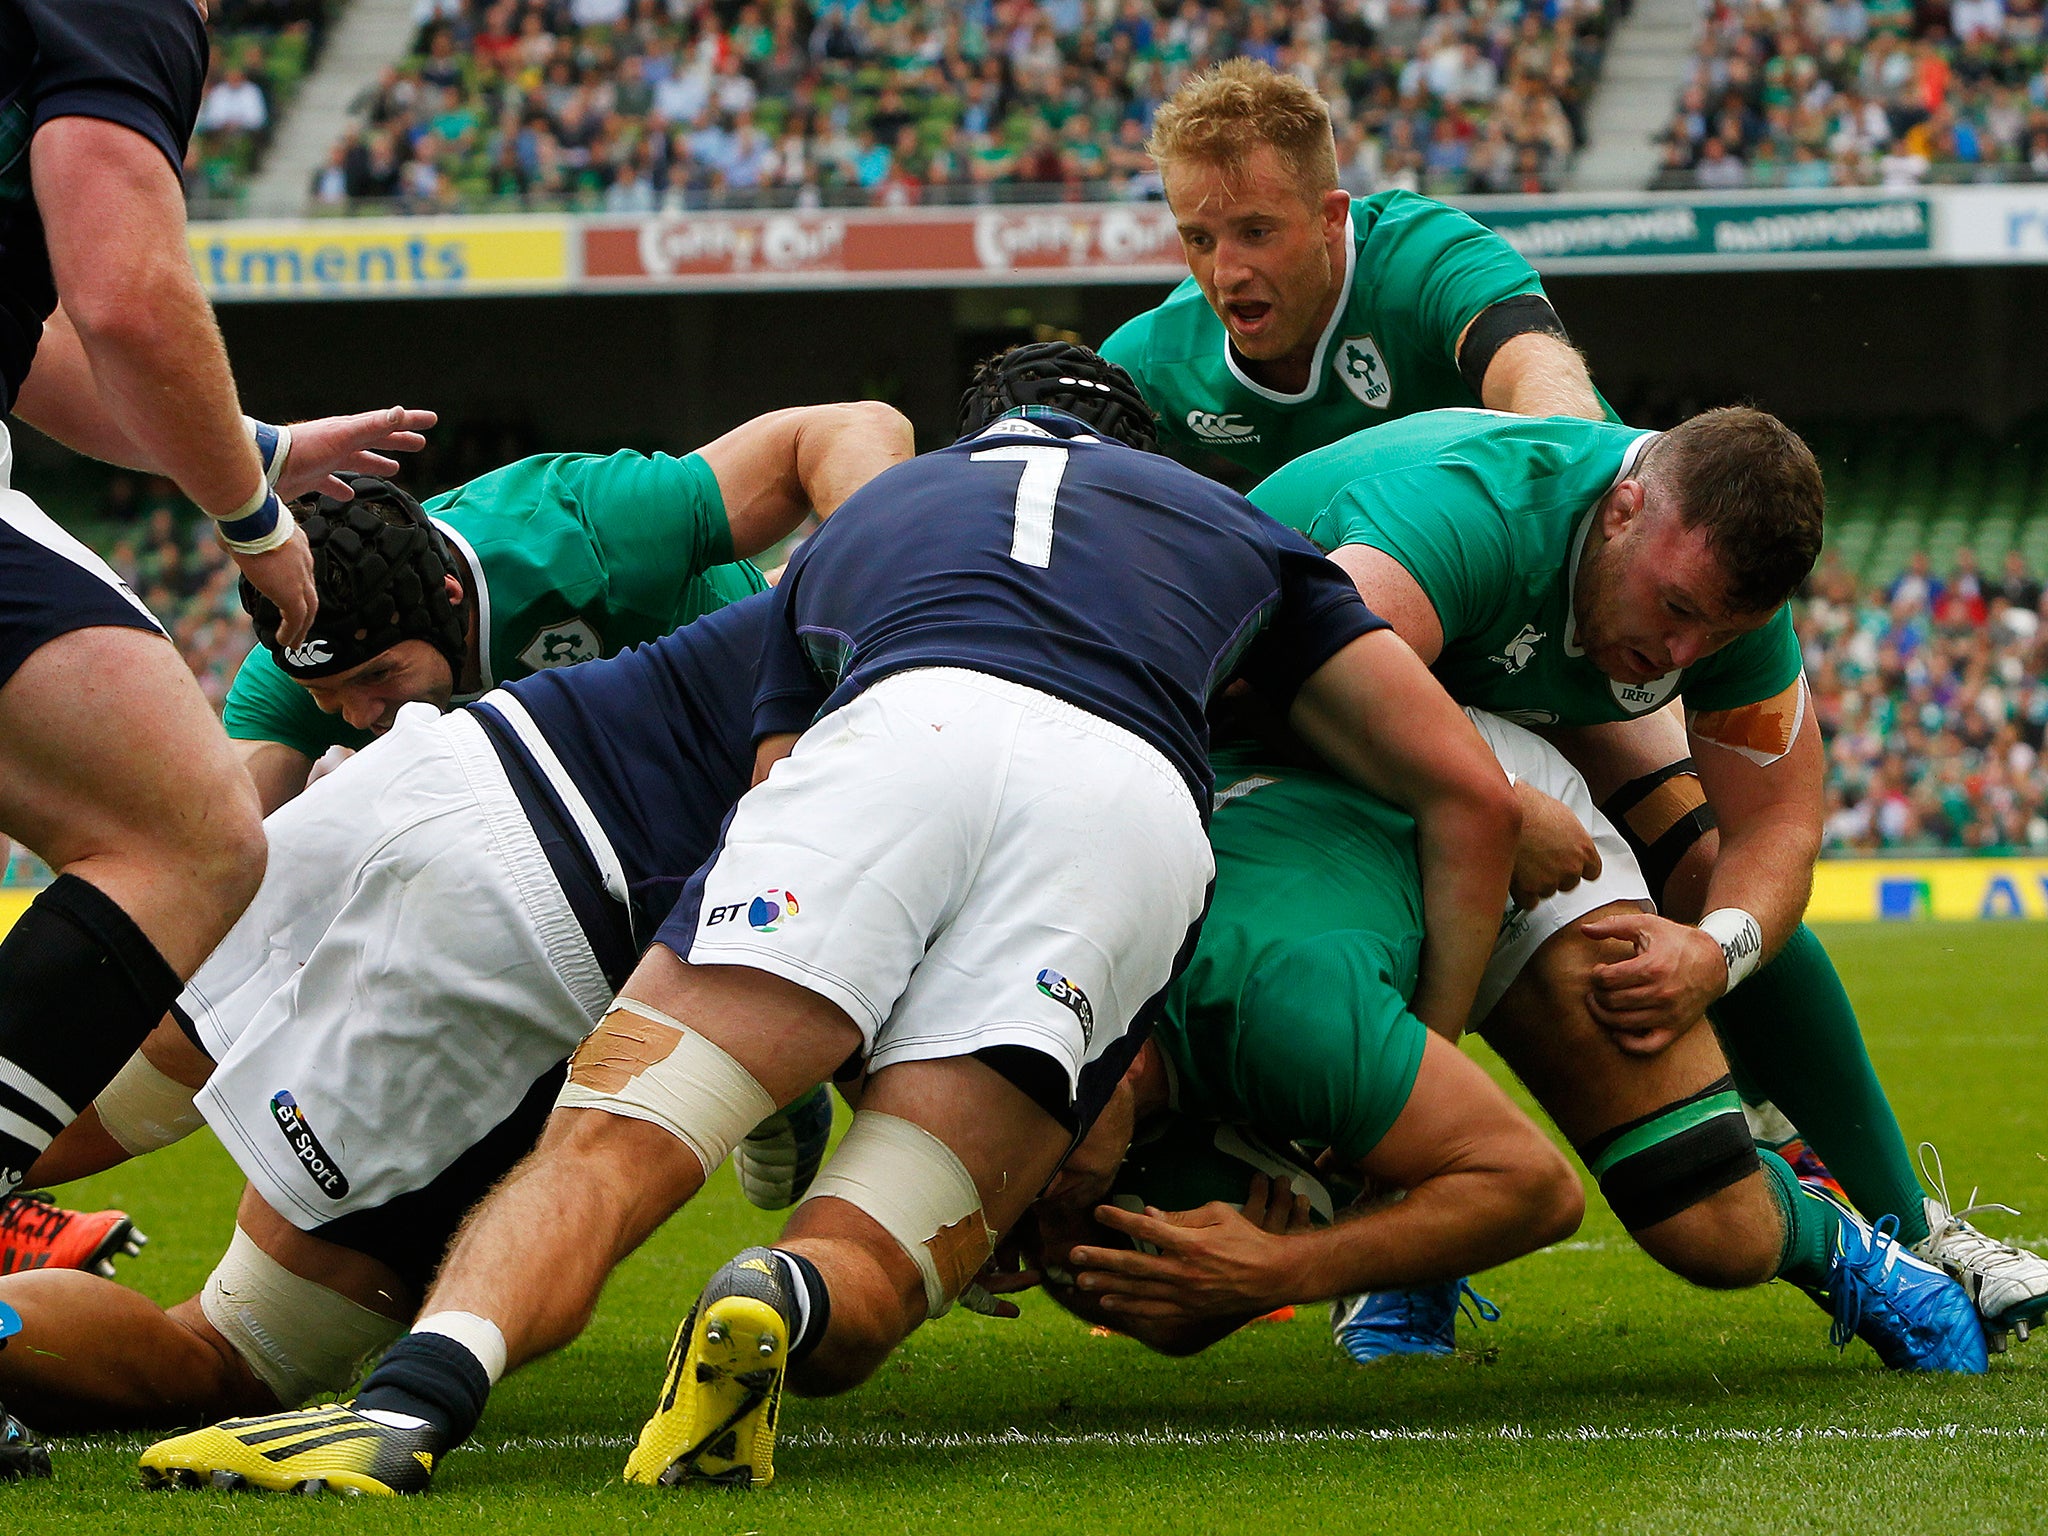 Ireland’s Chris Henry scores his side’s first try in their World Cup warm-up victory over Scotland in Dublin